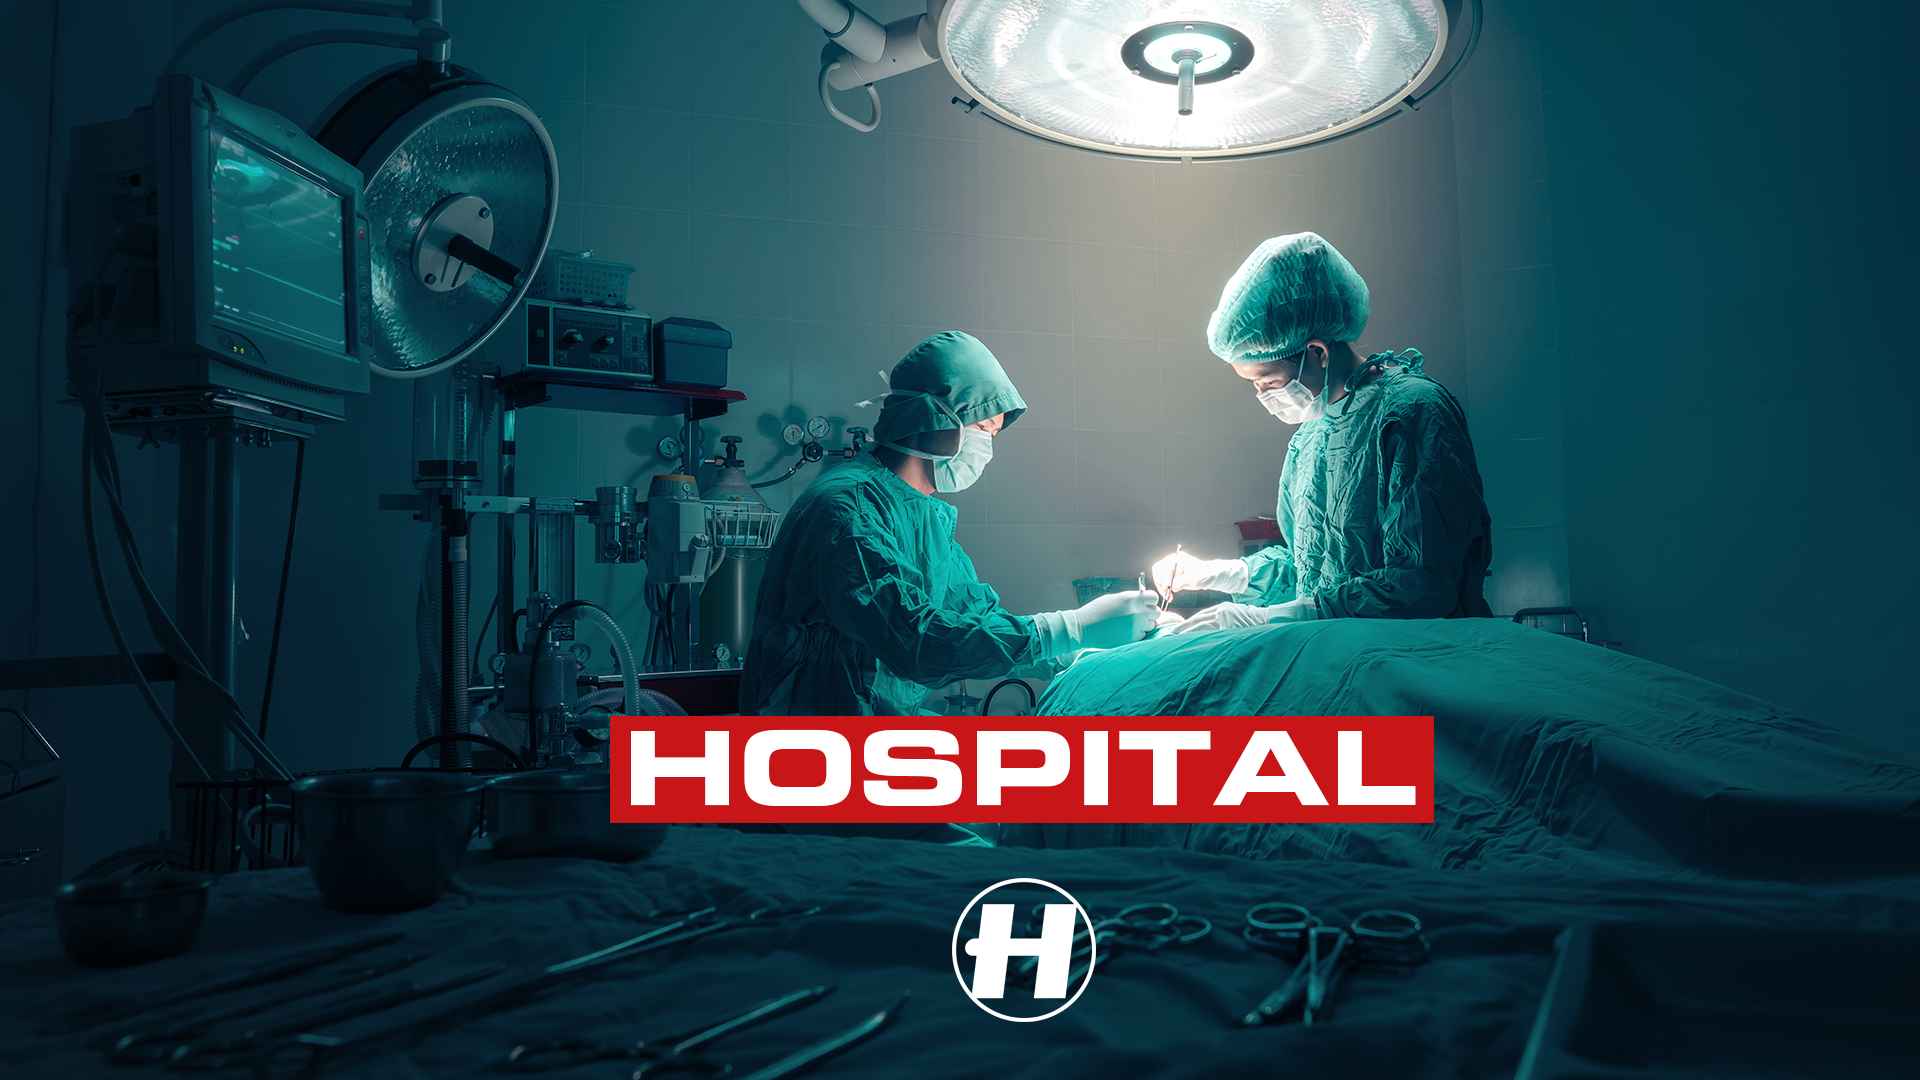 Hospital Hospital Records Drum And Bass 1920x1080